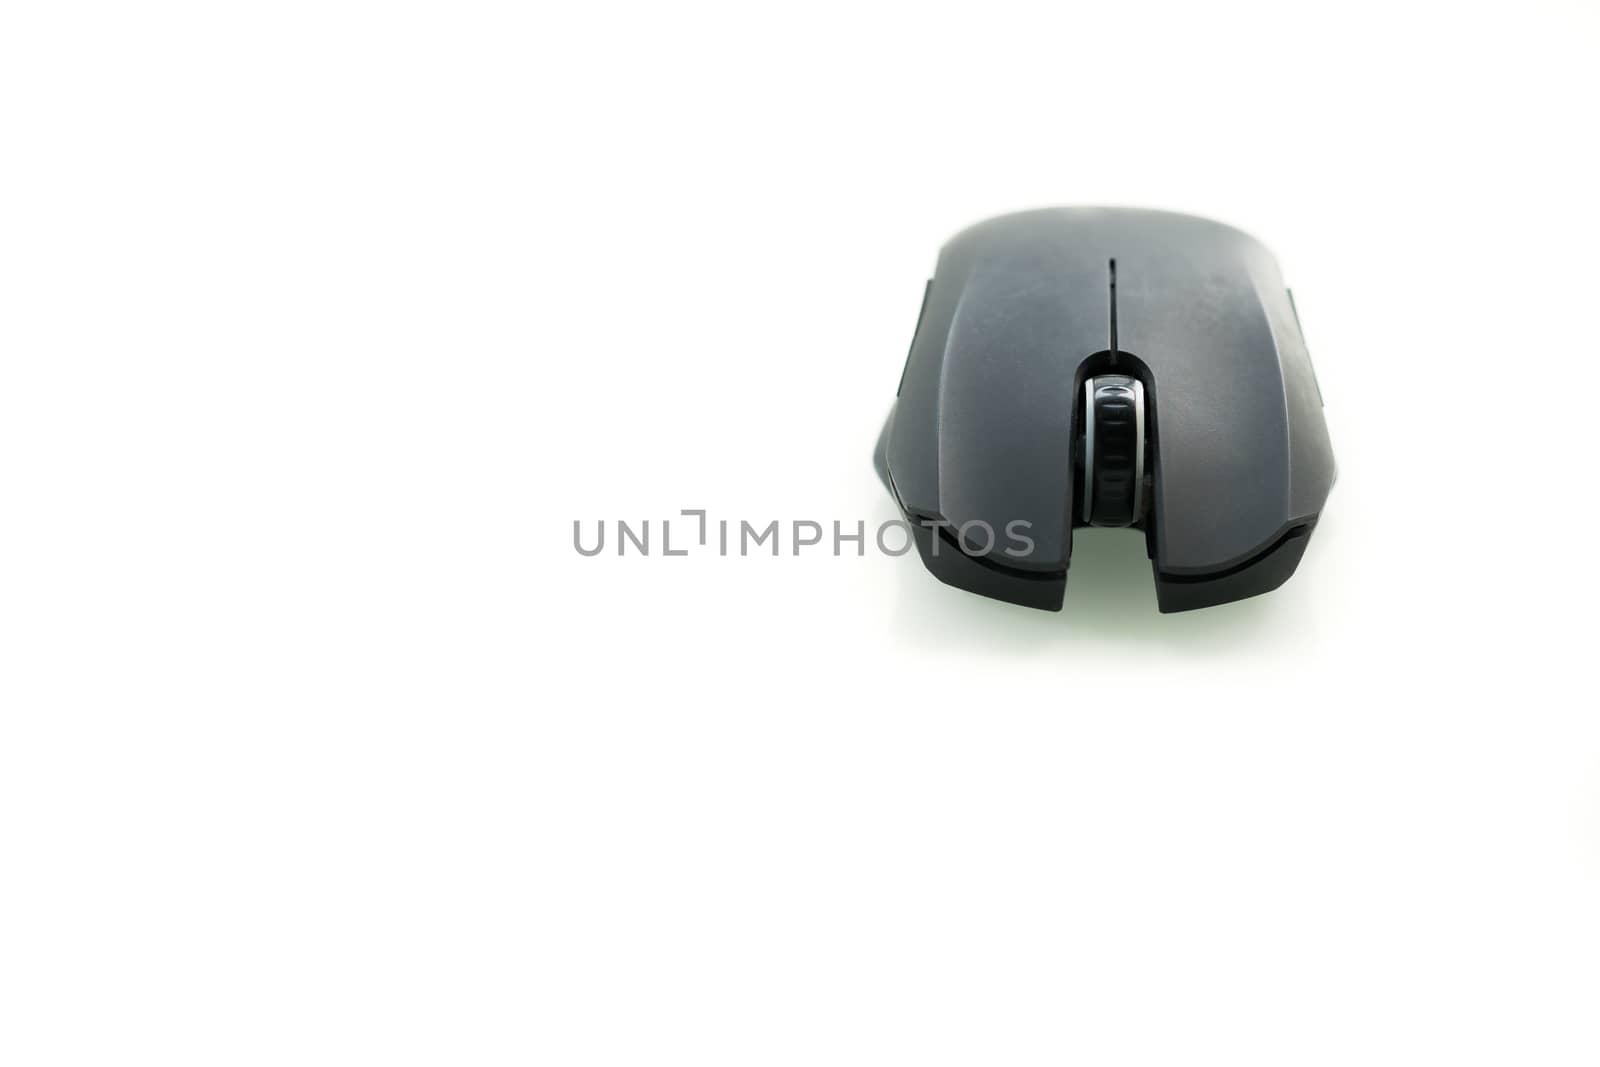 Wireless black computer mouse isolated on white background, frontview